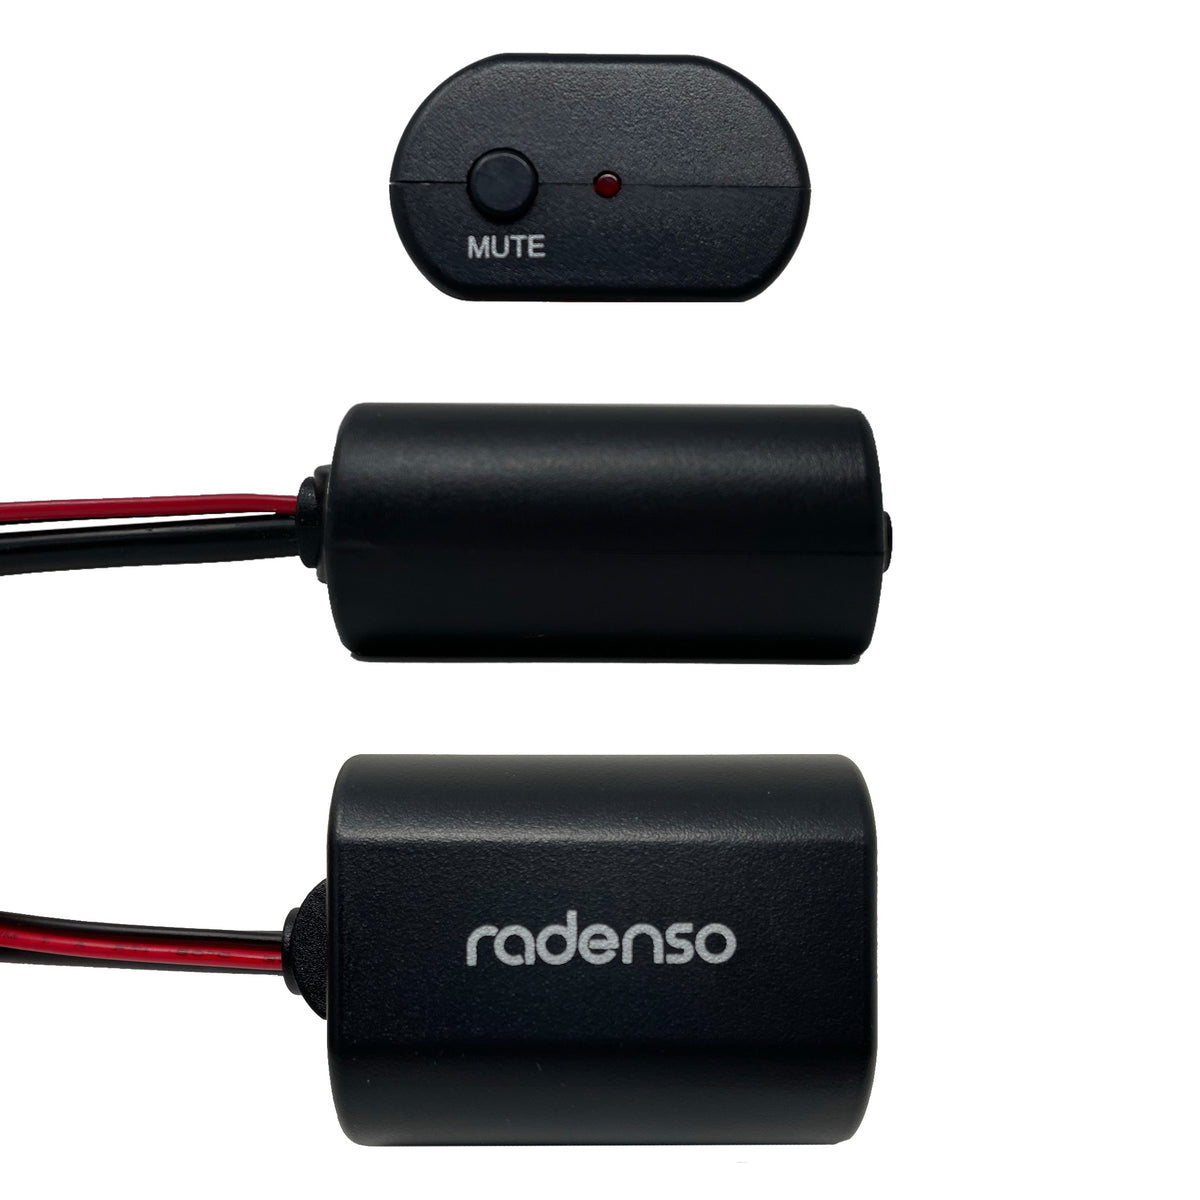 Radenso USB-C Power Adapter with mute button